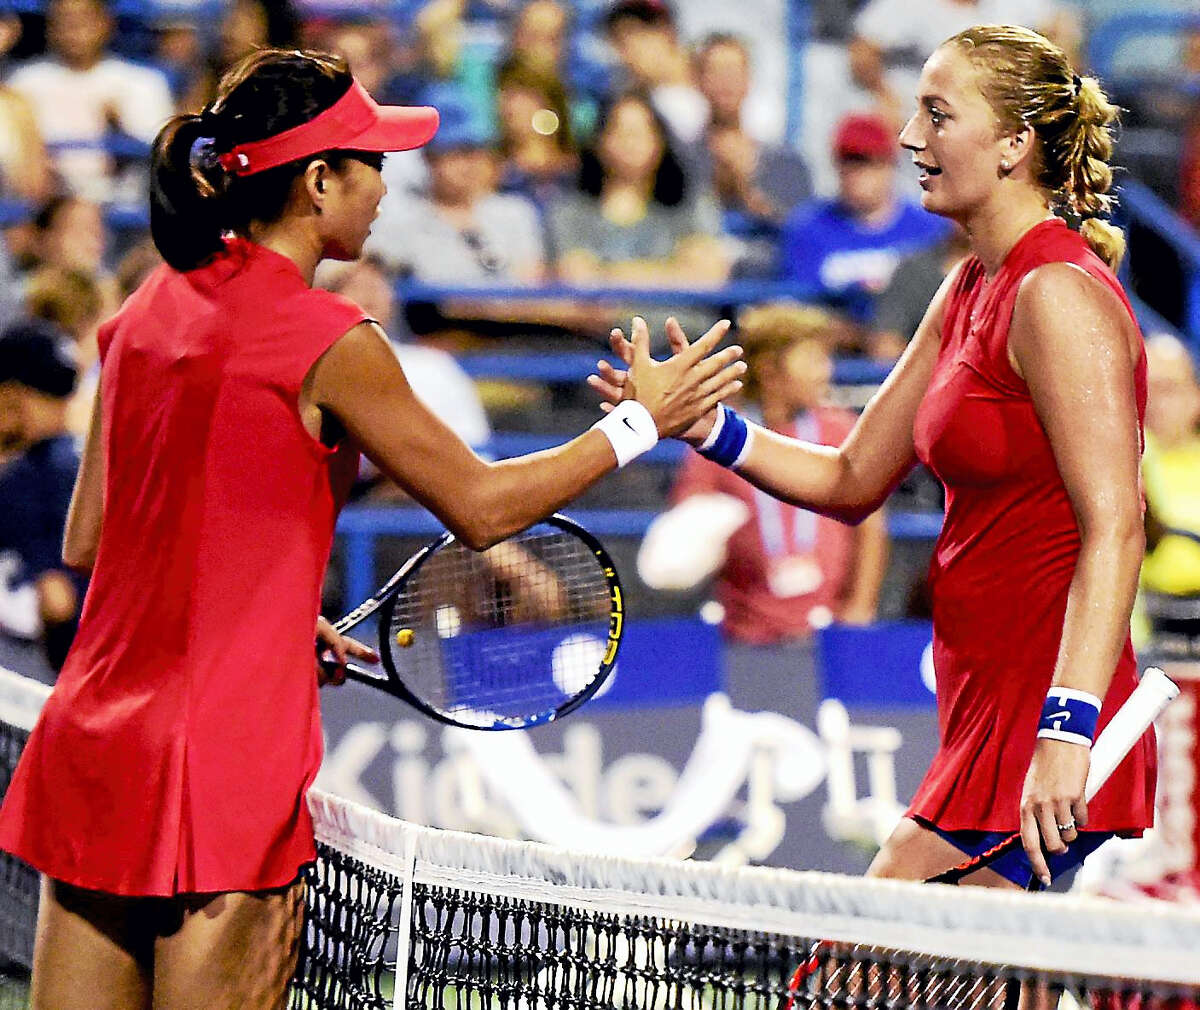 Shuai Zhang of China shakes hands with Petra Kvitova of the Czech Republic after defeating Kvitova 6-2, 6-1 during the first round of the Connecticut Open tennis tournament on Stadium Court at the Connecticut Tennis Center in New Haven.